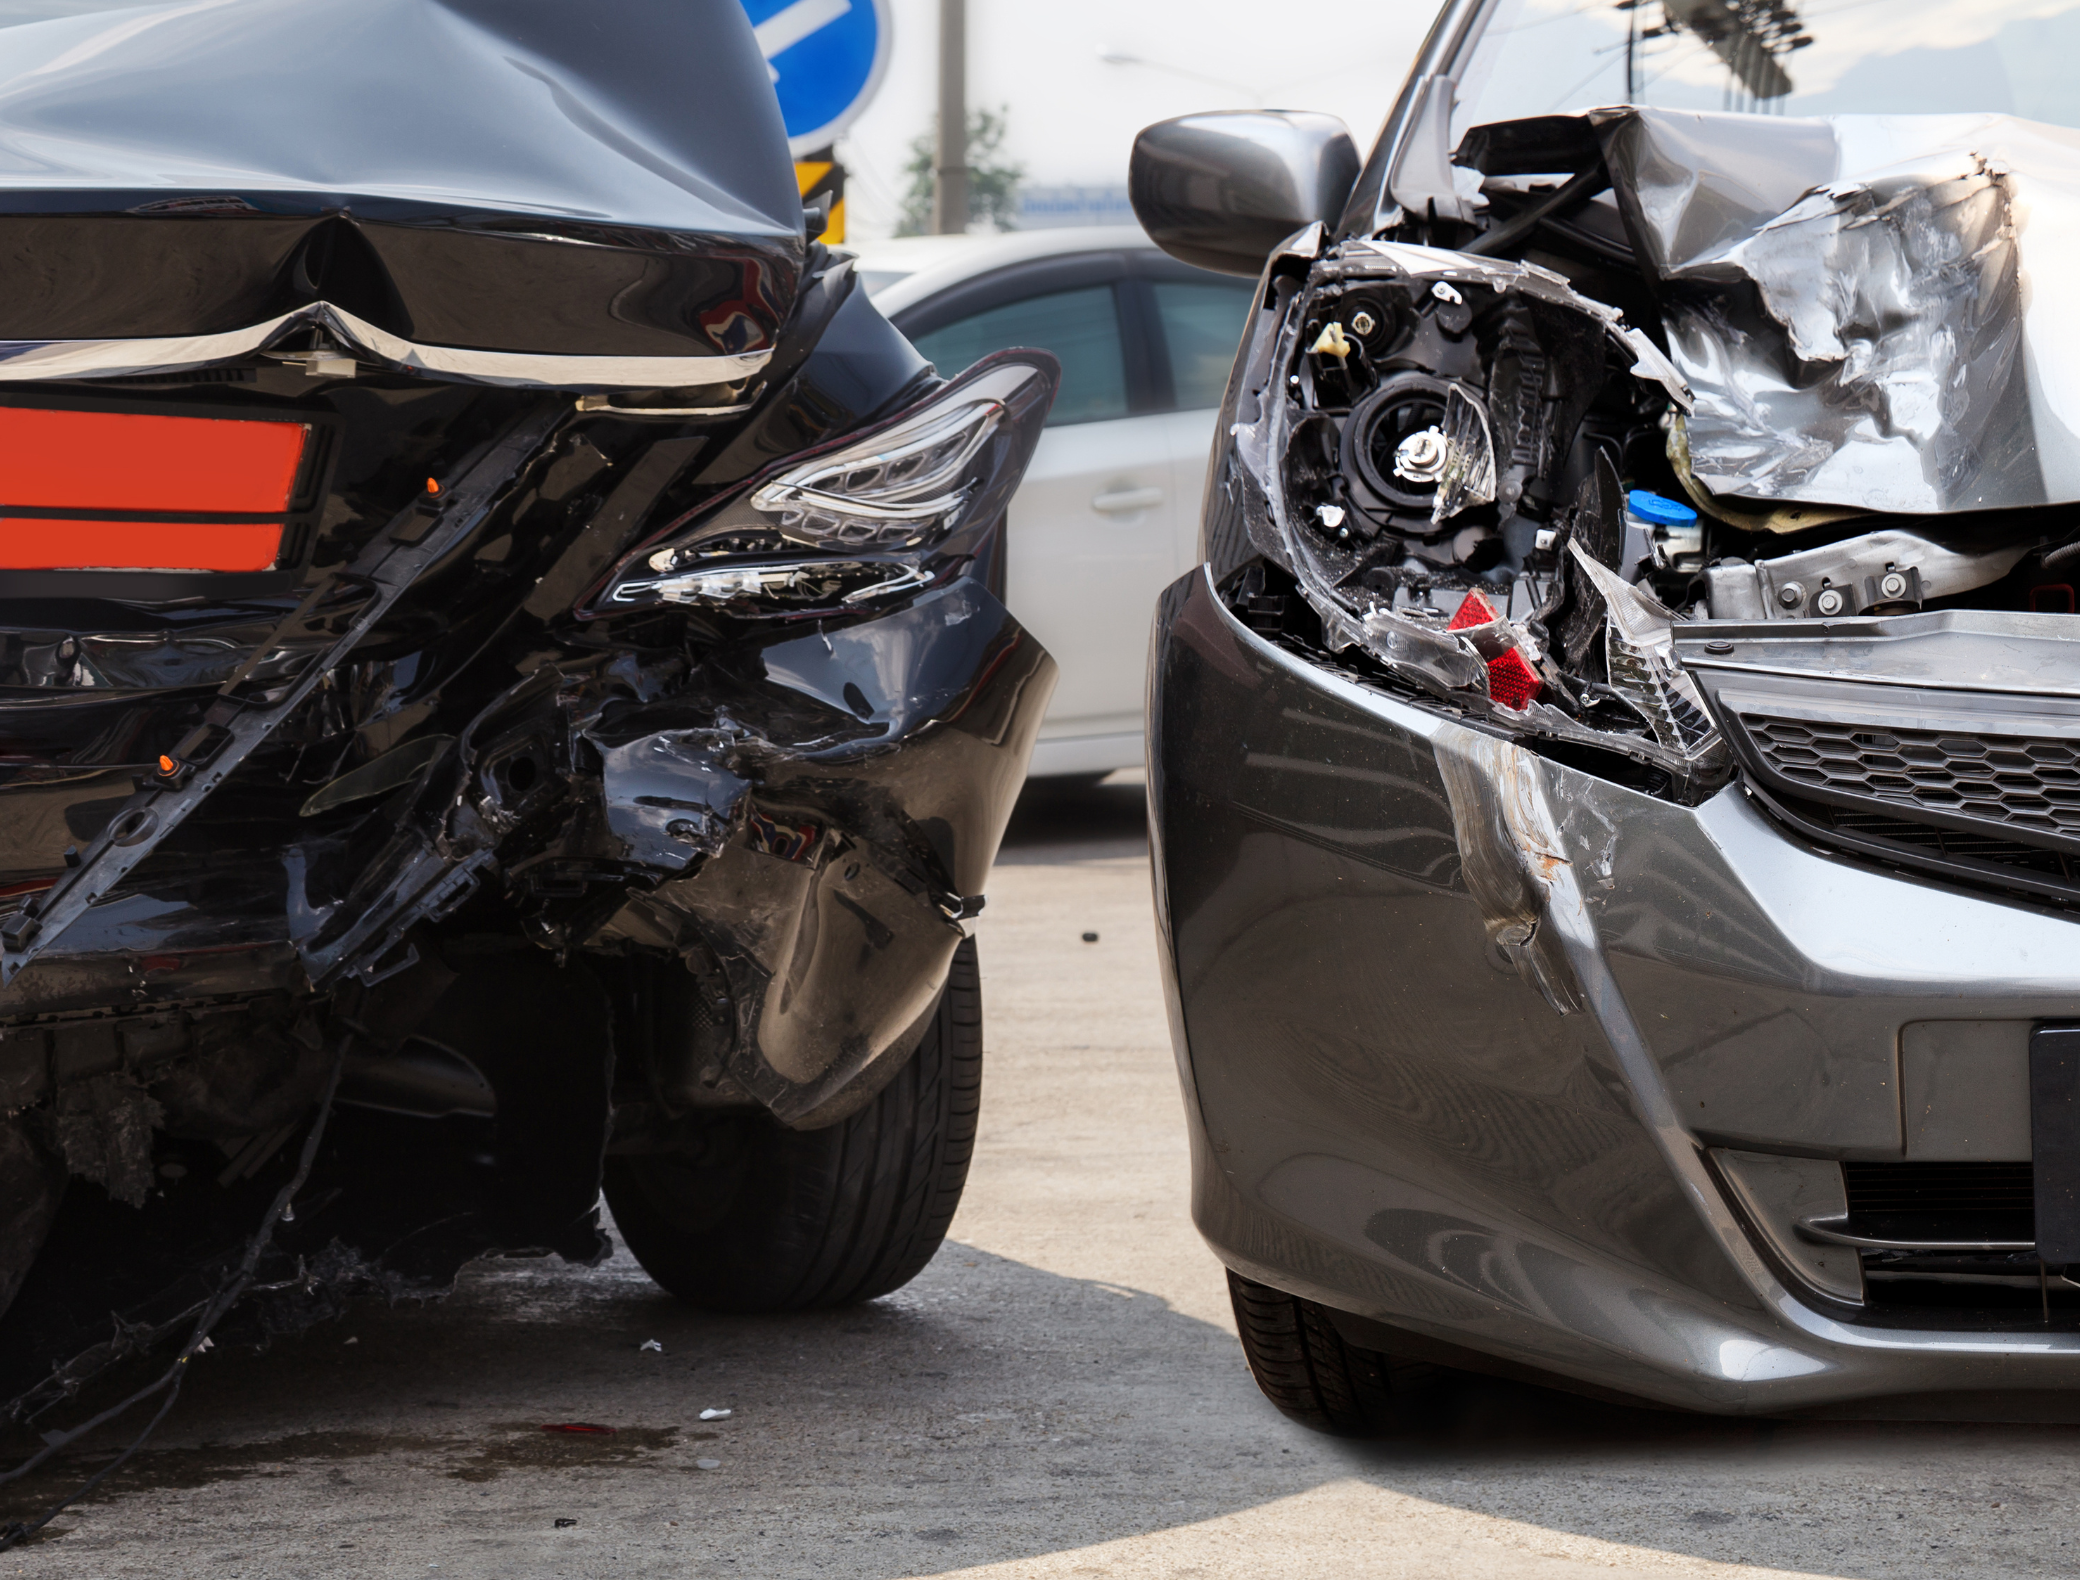 Common Causes of Car Accidents in South Florida